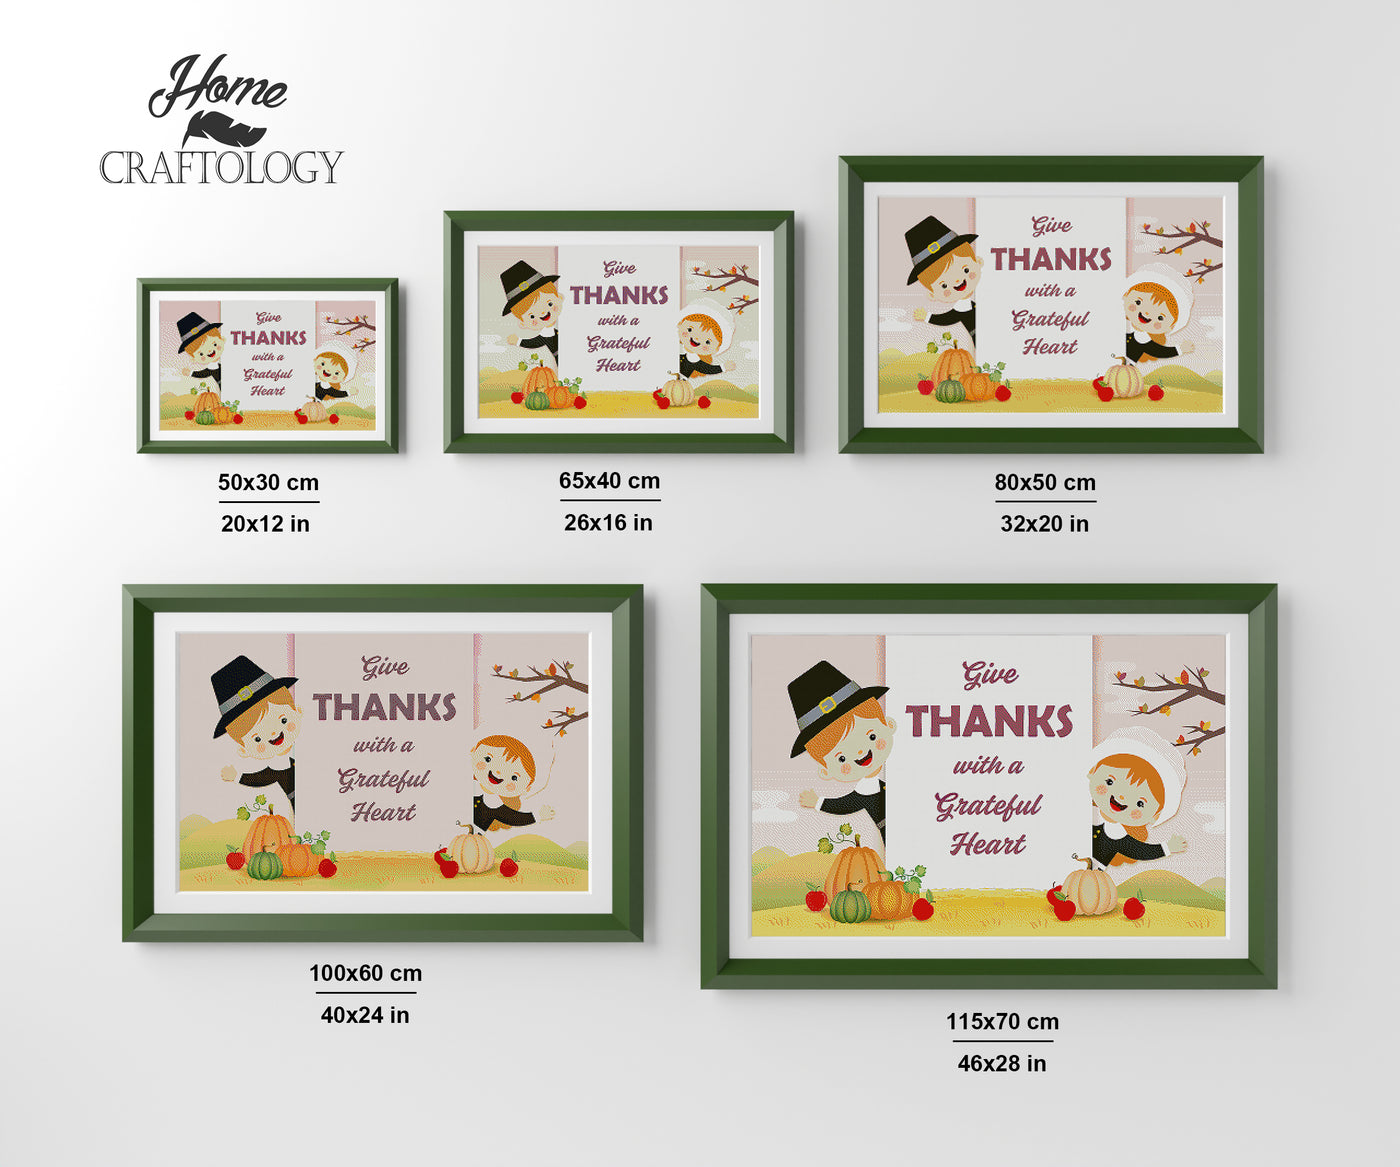 Give Thanks with a Grateful Heart - Premium Diamond Painting Kit